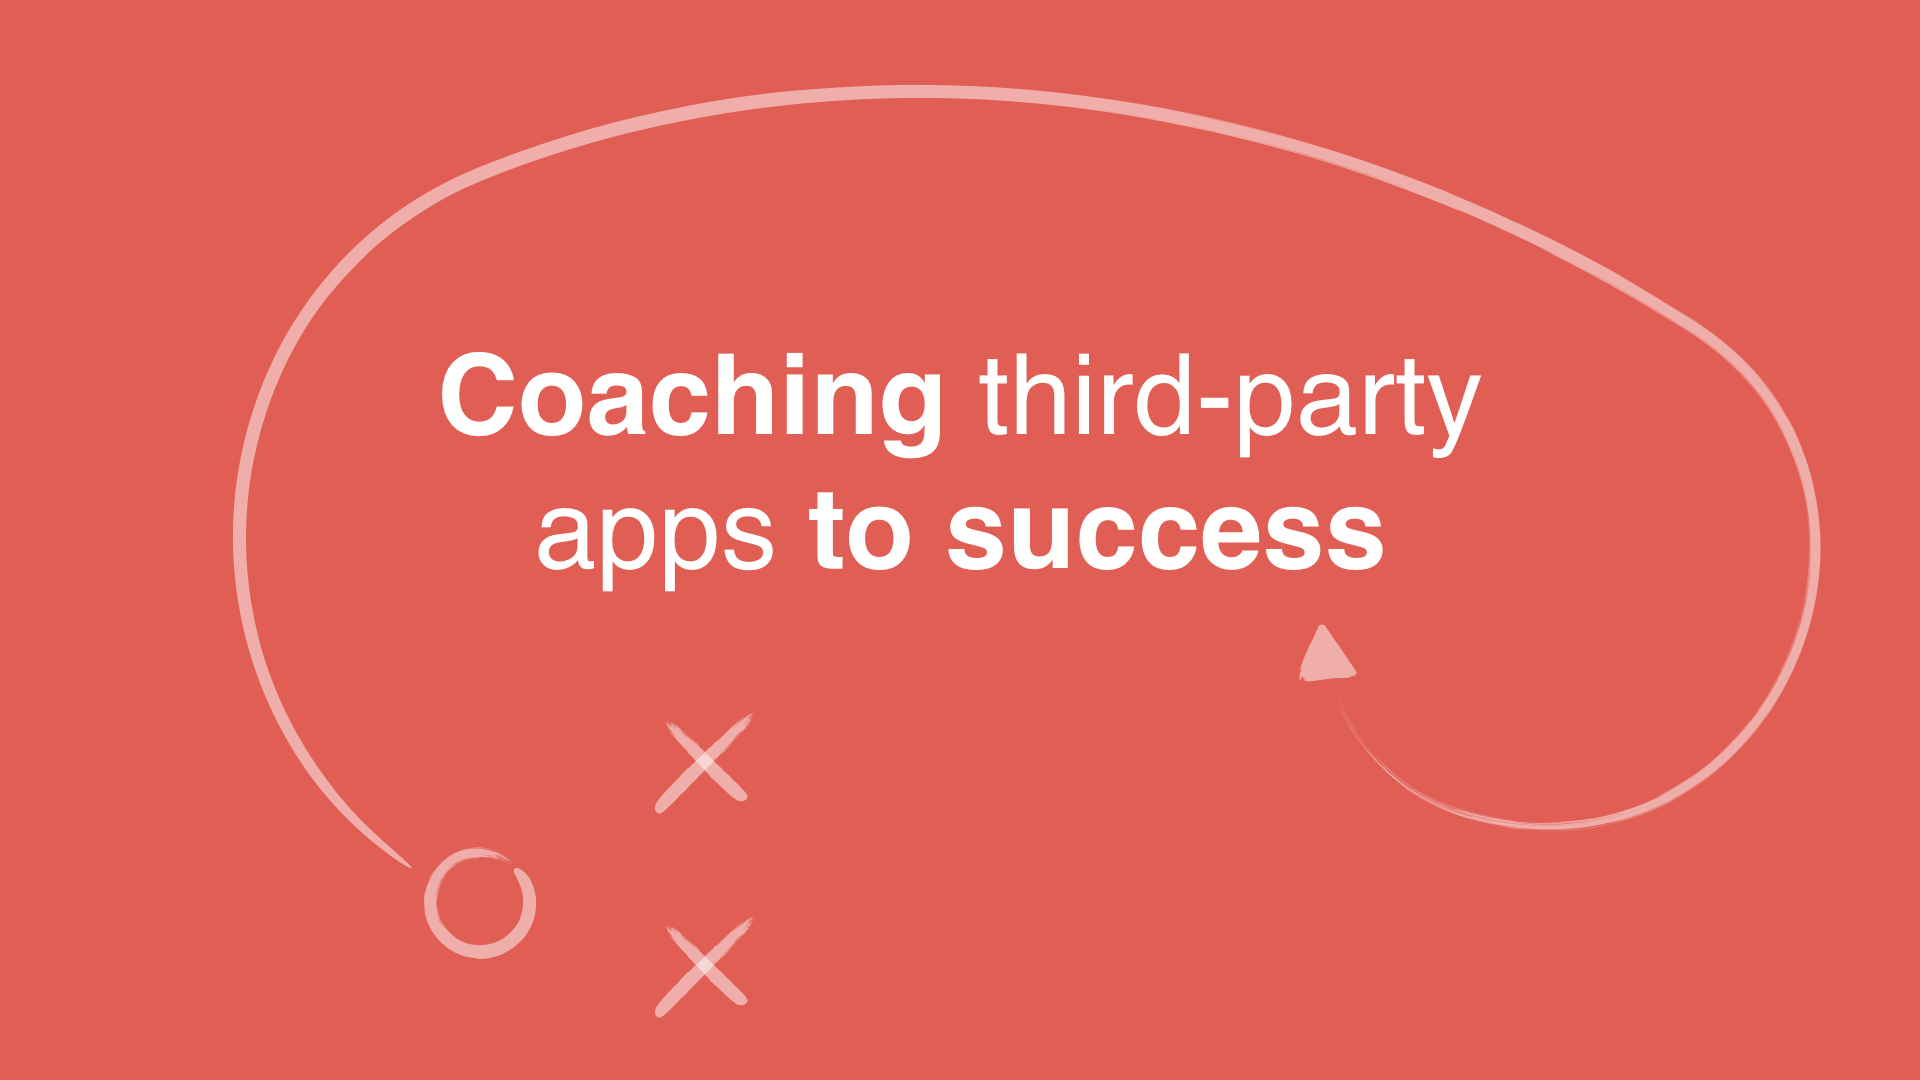 Text surrounded by football play diagram: coaching third-party apps to success.